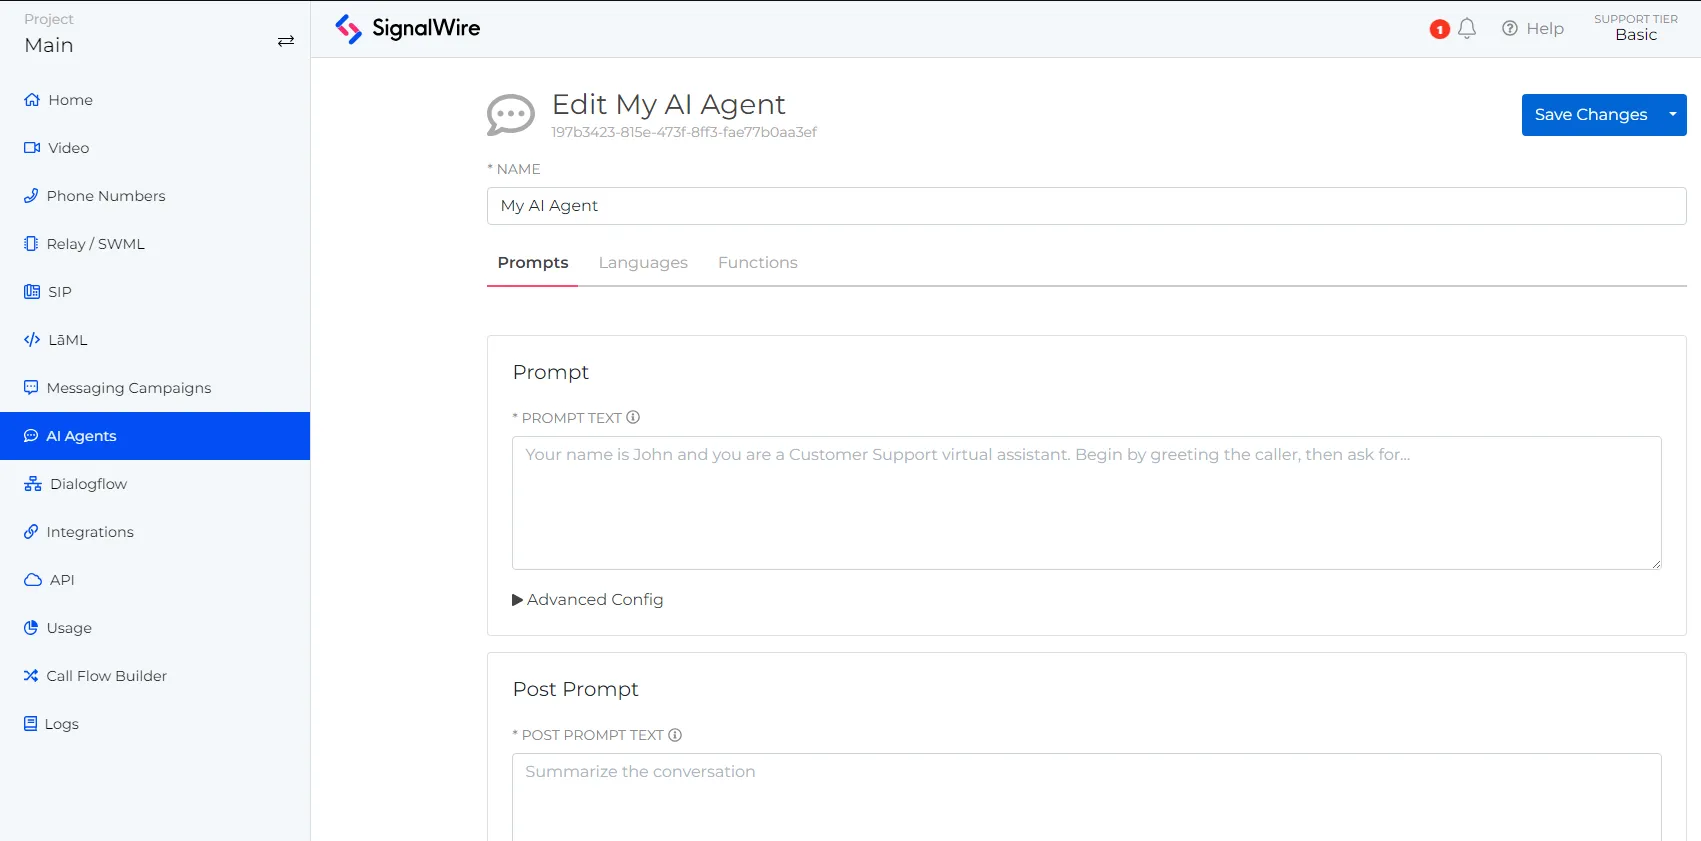 SignalWire Dashboard that shows the sidebar option 'AI Agent' selected, and is displaying the AI Agent settings page.